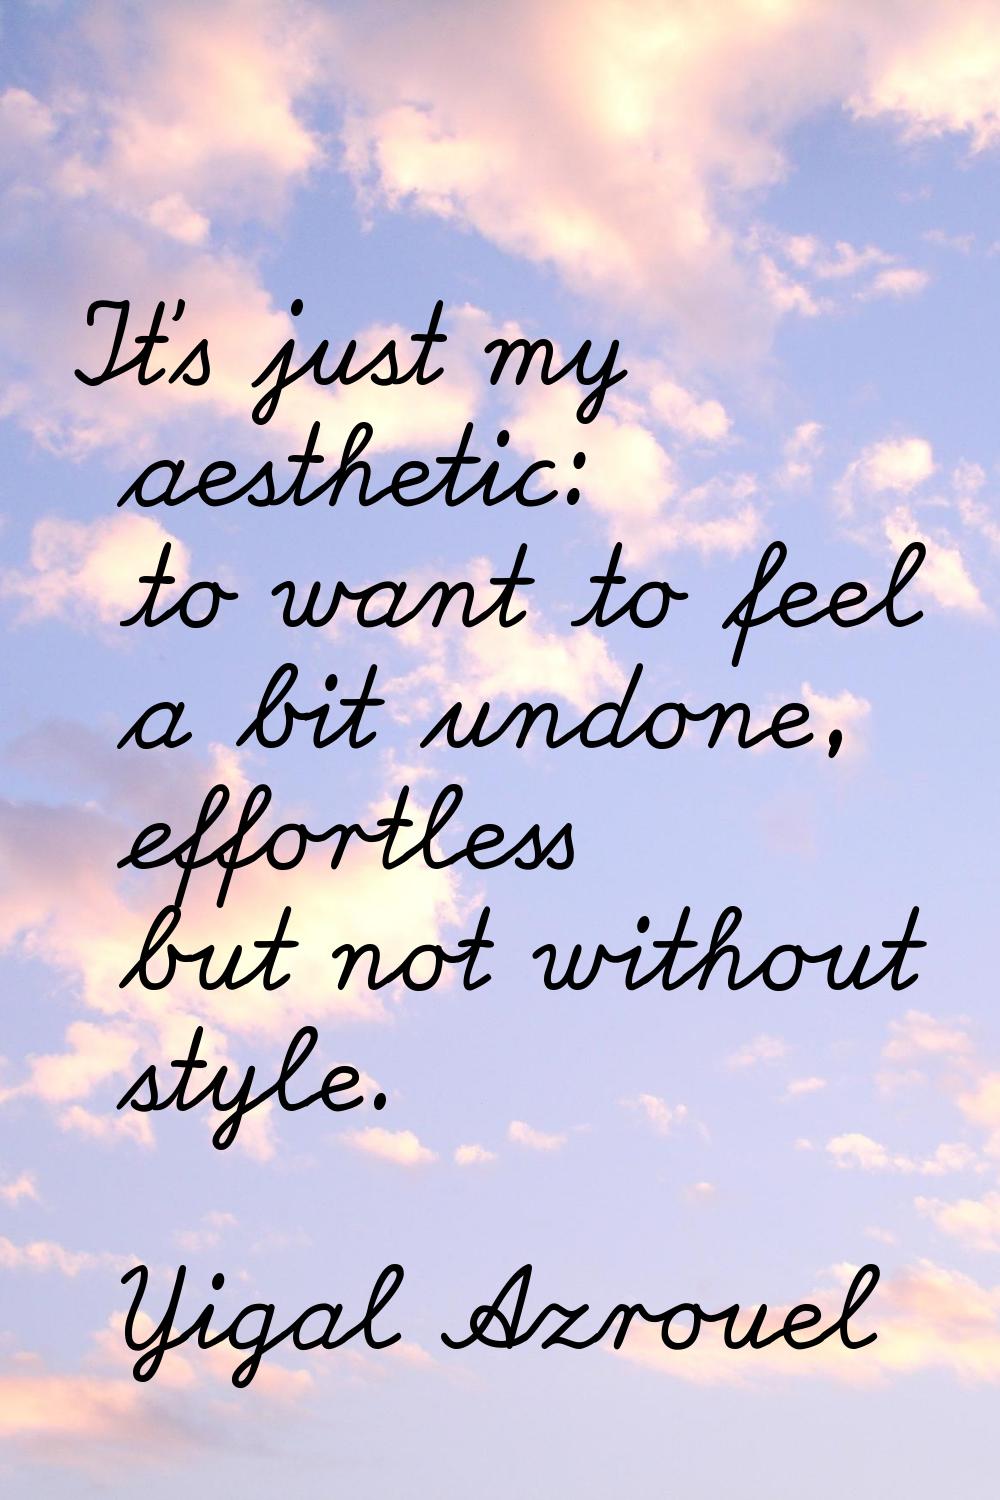 It's just my aesthetic: to want to feel a bit undone, effortless but not without style.